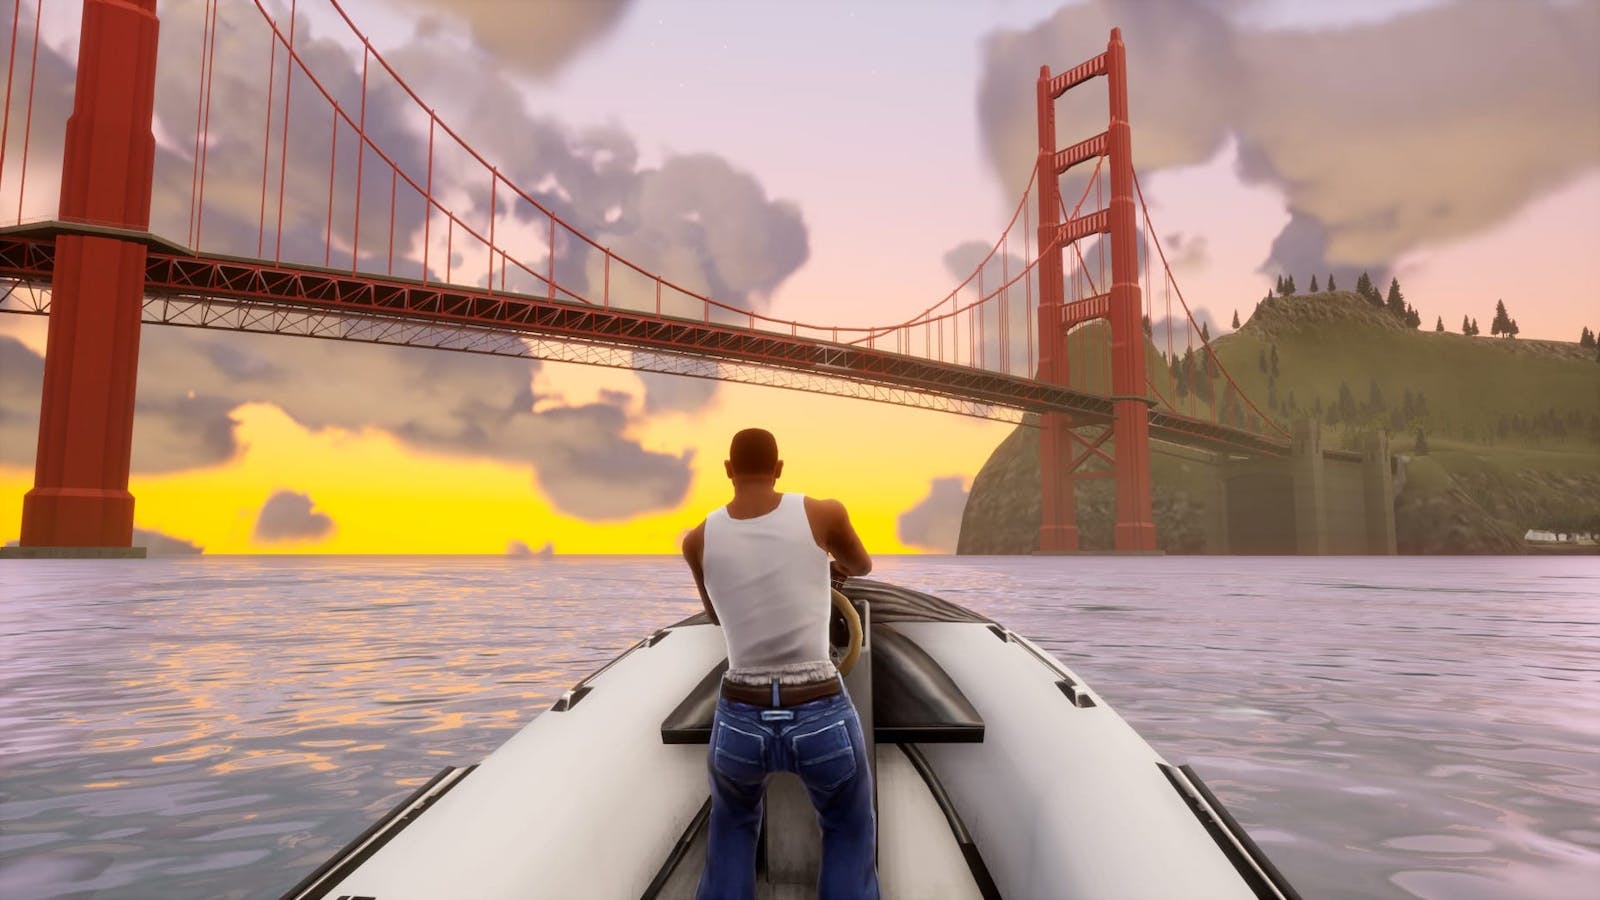 A screenshot from the upcoming non-VR remaster of Grand Theft Auto: San Andreas. Credit: Rockstar Games/Take Two